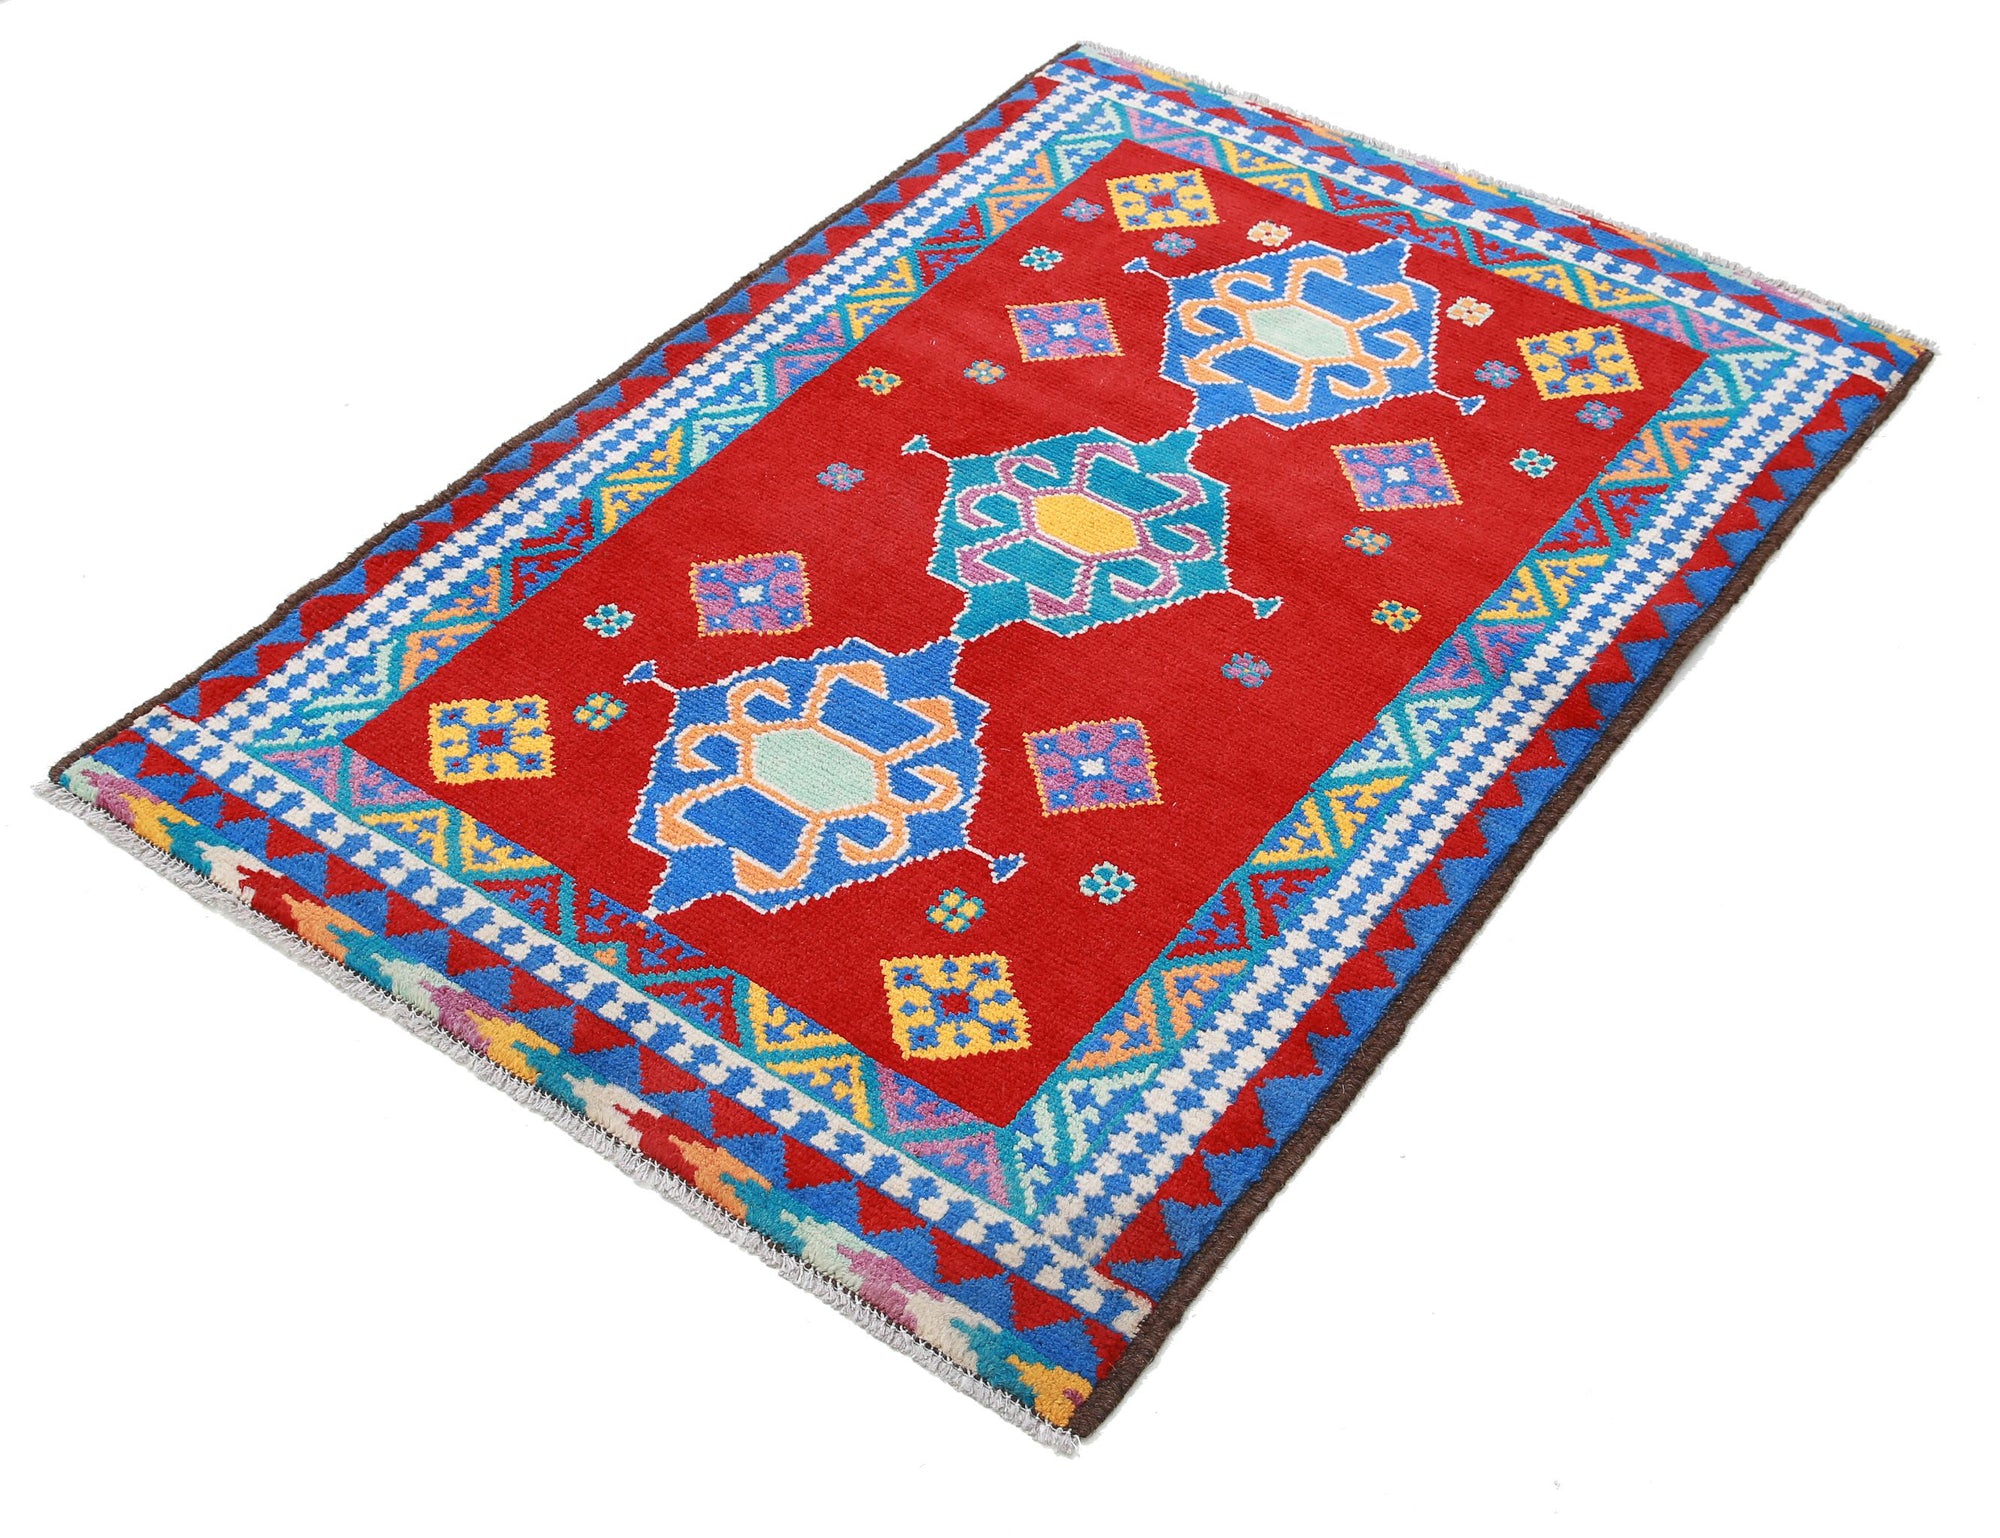 Revival-hand-knotted-qarghani-wool-rug-5014205-2.jpg